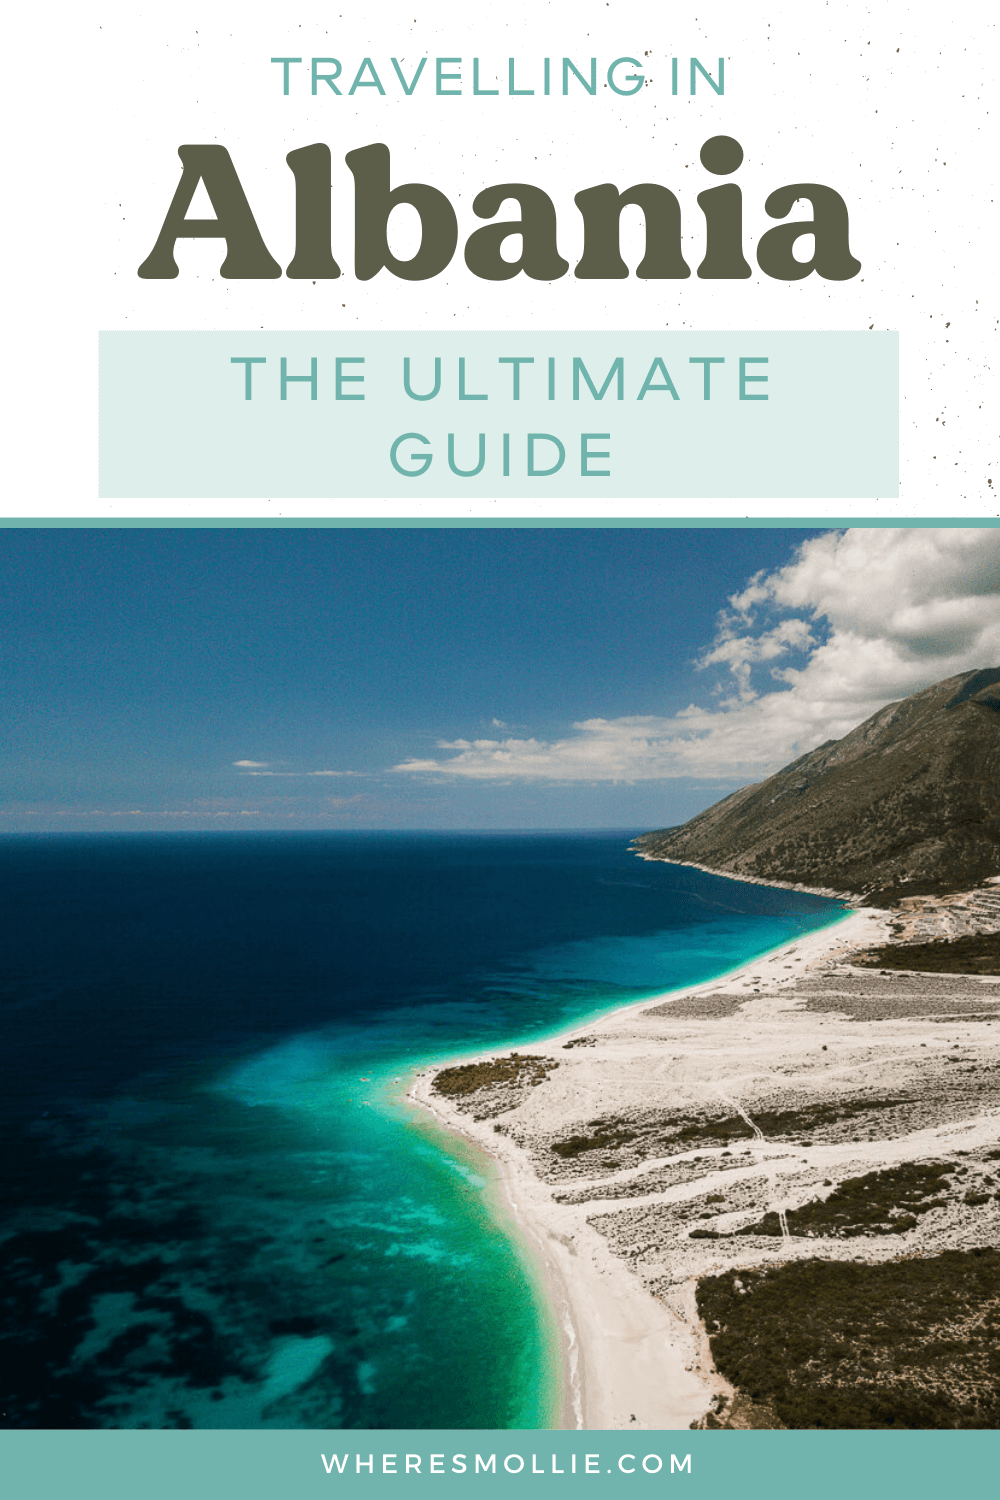 A complete guide to travelling in Albania